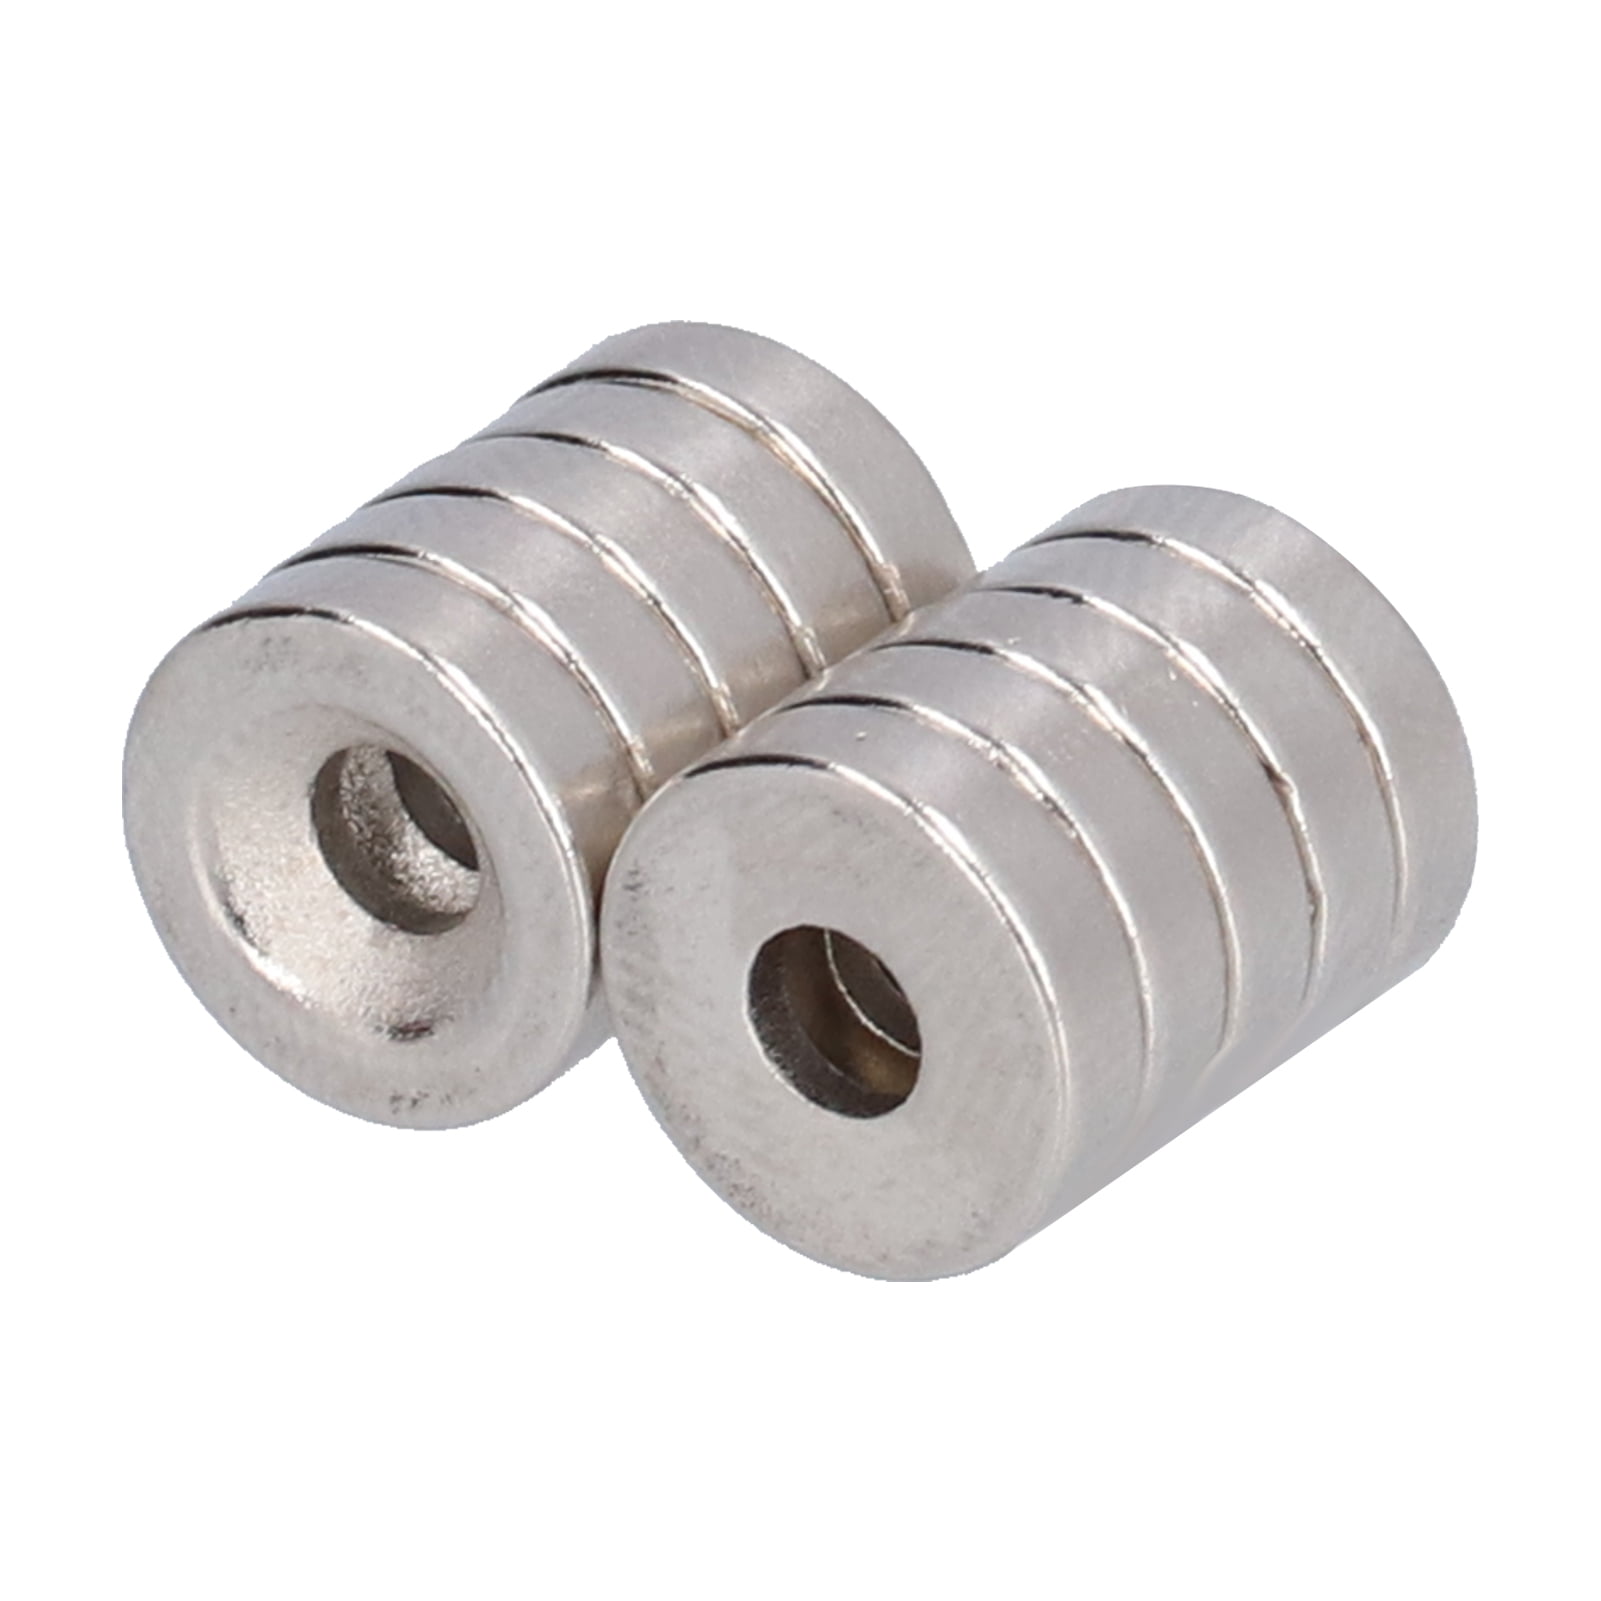 10 25pc 12mm x 5mm Hole 4mm 1/2"x3/16" Countersunk Ring Rare Earth Crafts Magnet 